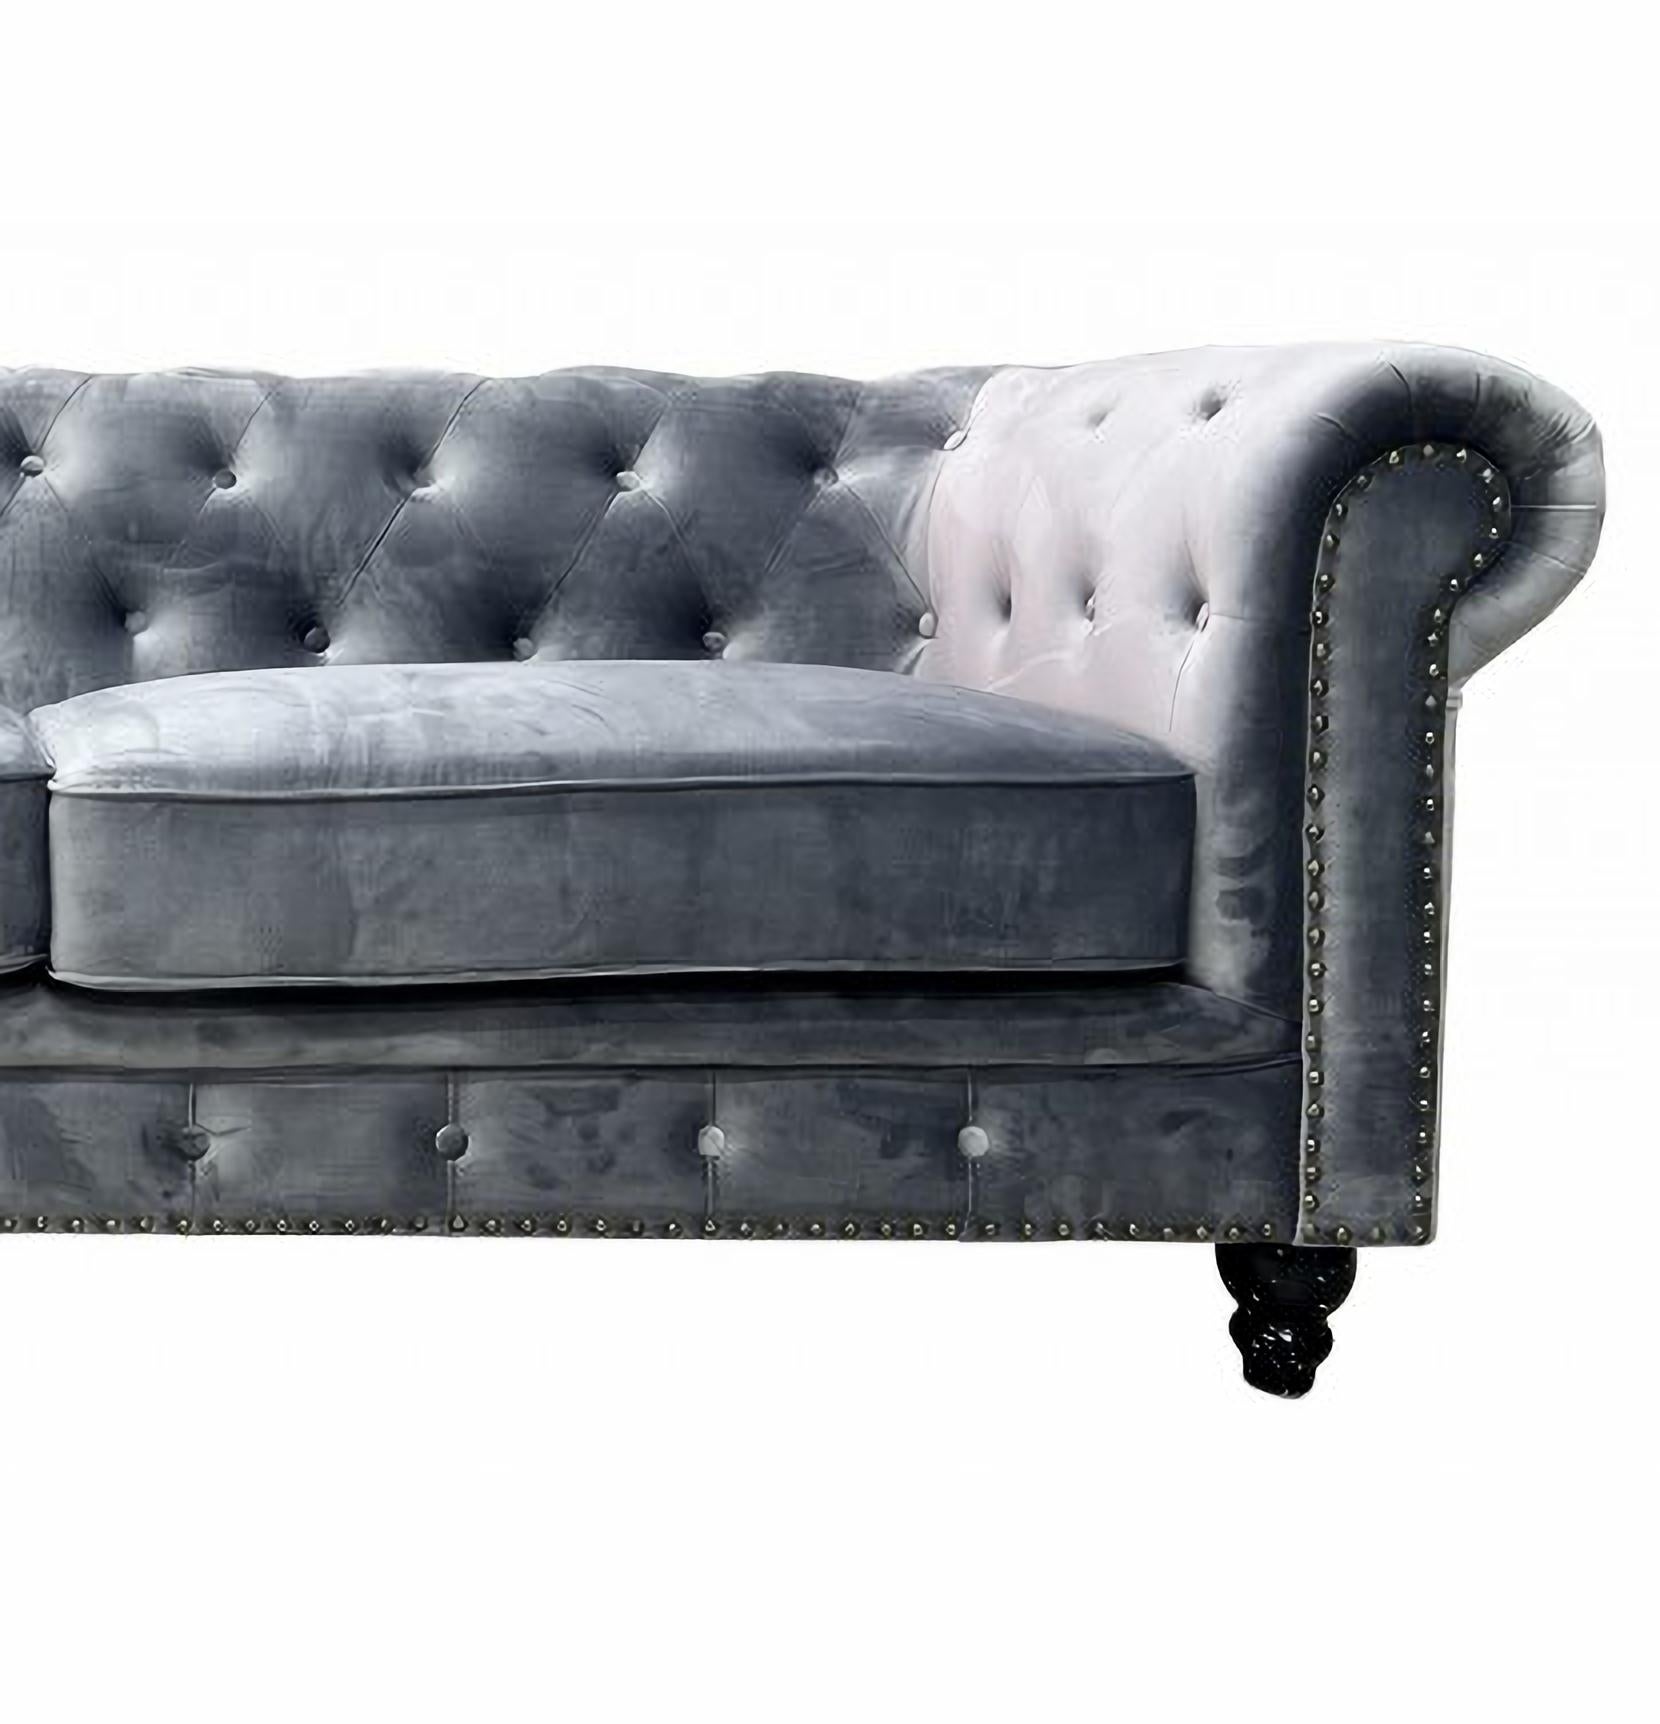 Chester Premium 3-seater sofa, green velvet upholstery

-Design sofa, 3 seats.

-Made with a solid wooden structure.

-High density polyurethane foam.

-Upholstered in navy blue velvet fabric

-2-seater sofa to match, optional

-Other